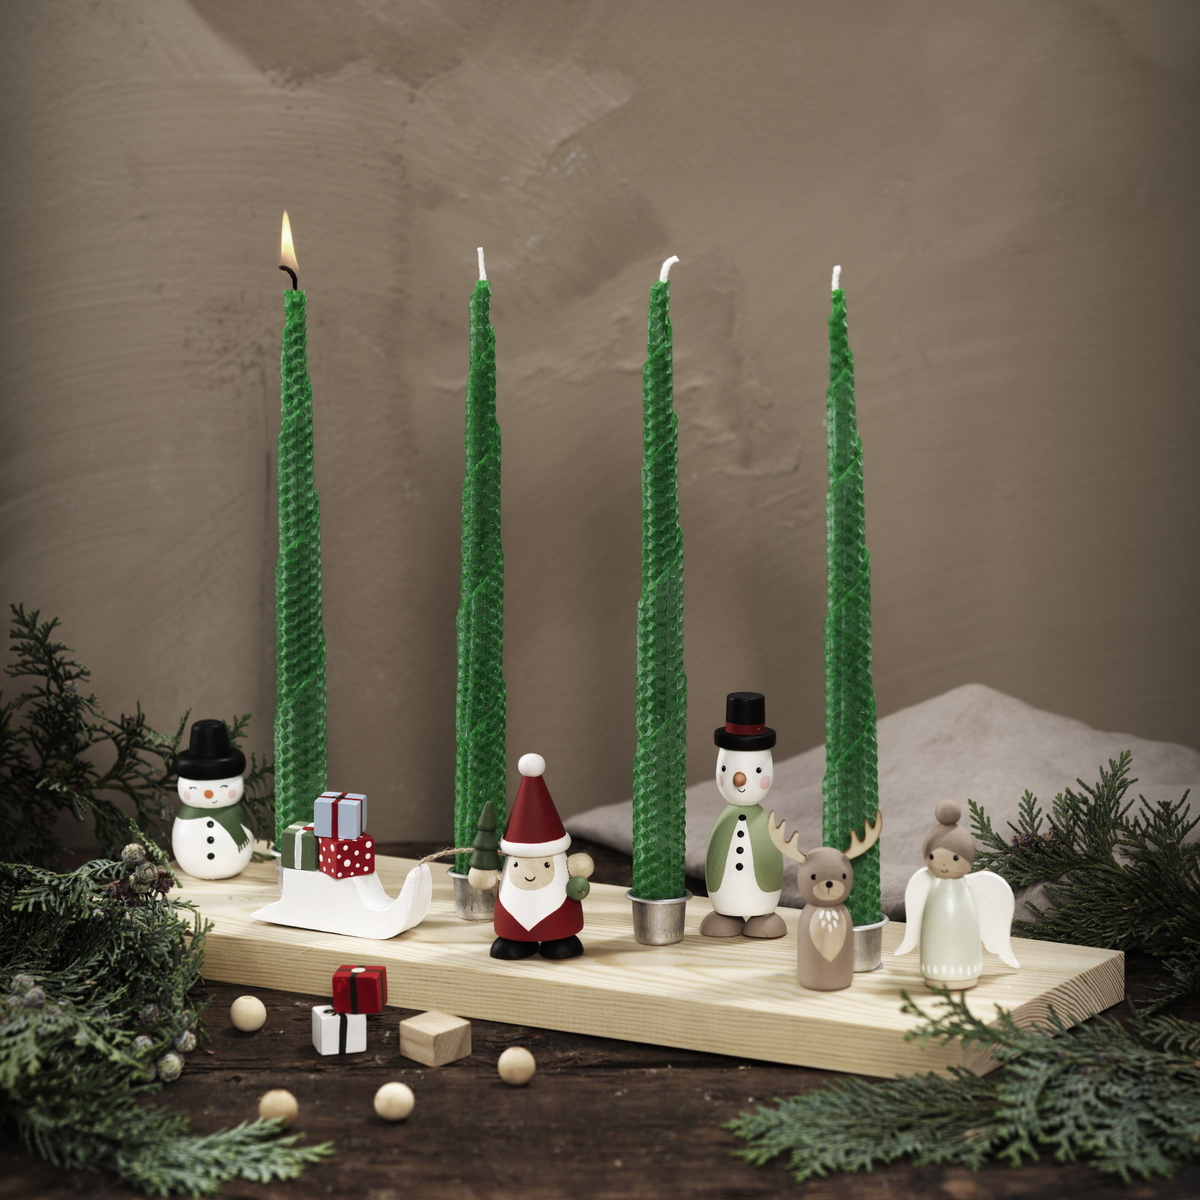 Make an Advent candle holder with holiday figures